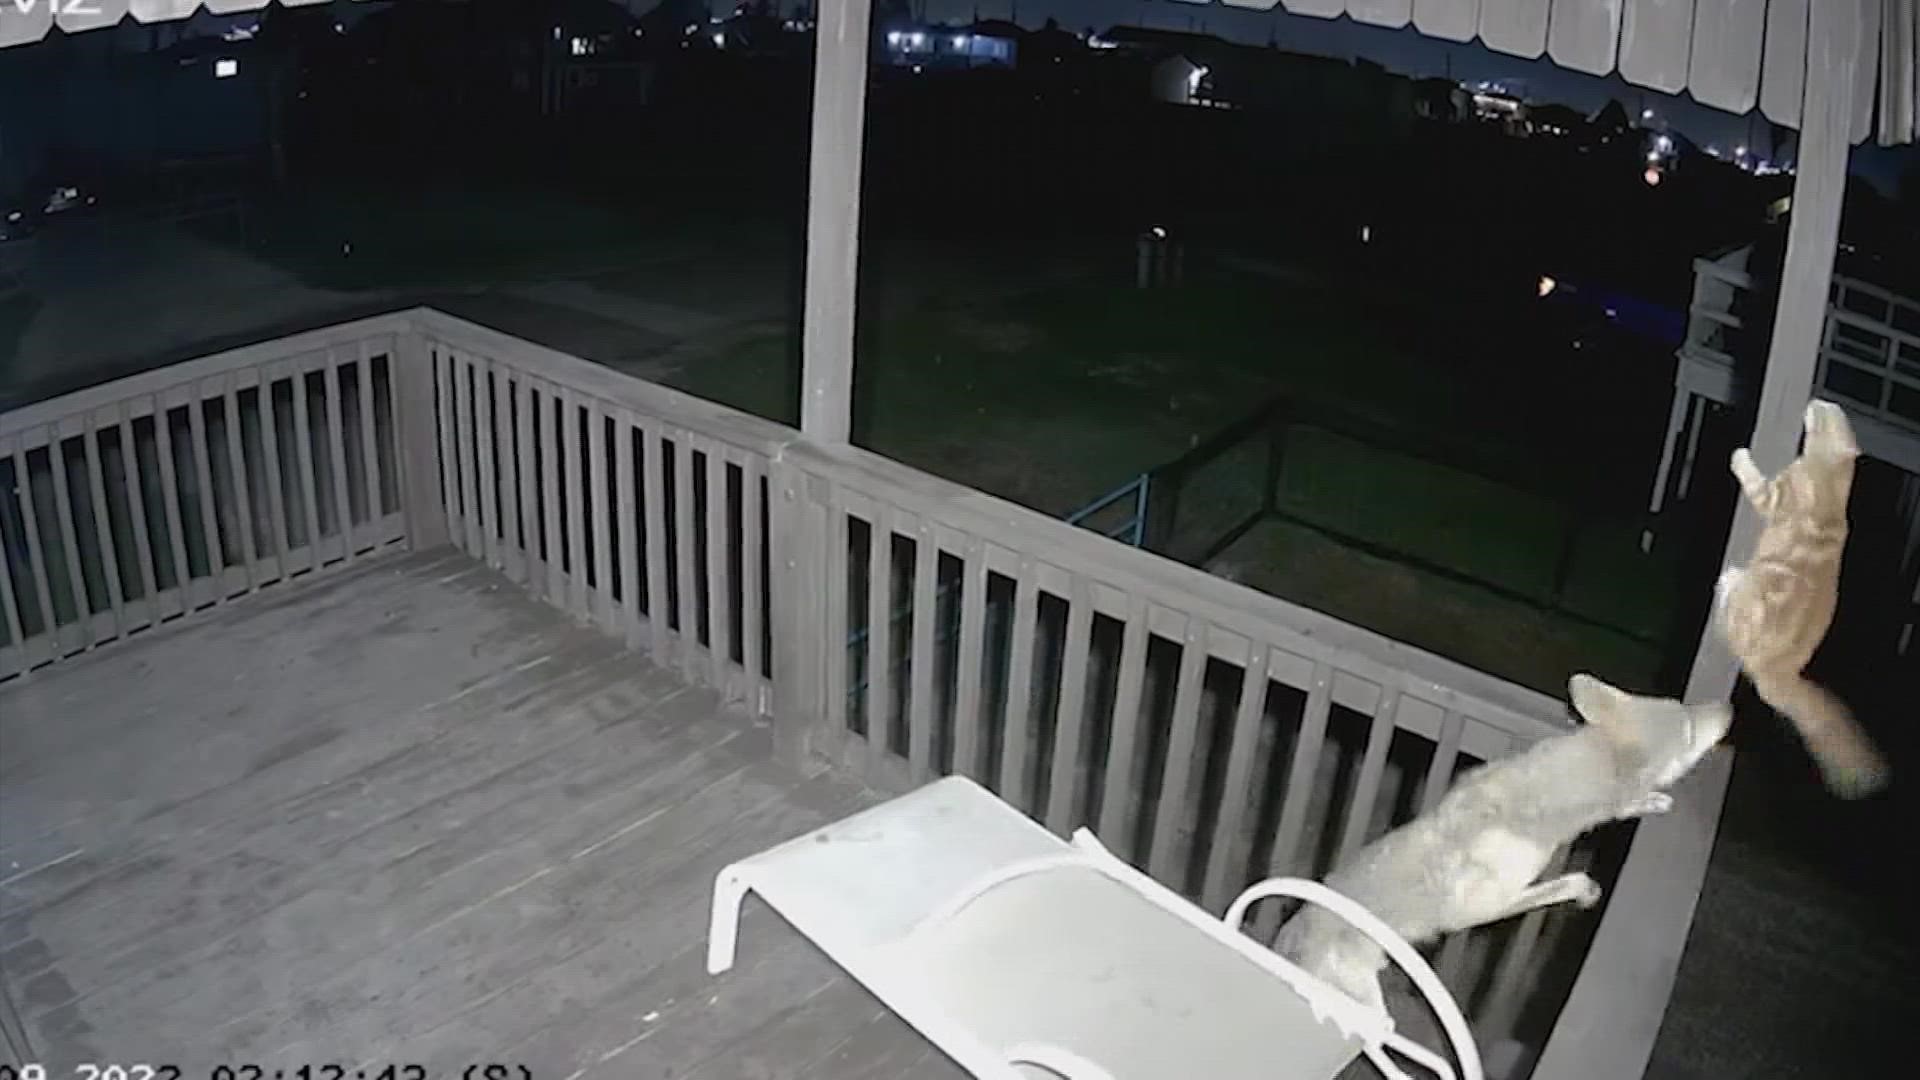 A cat’s ninja-like skills helped it escape a coyote attack. The encounter happened on a family’s deck in Surfside.